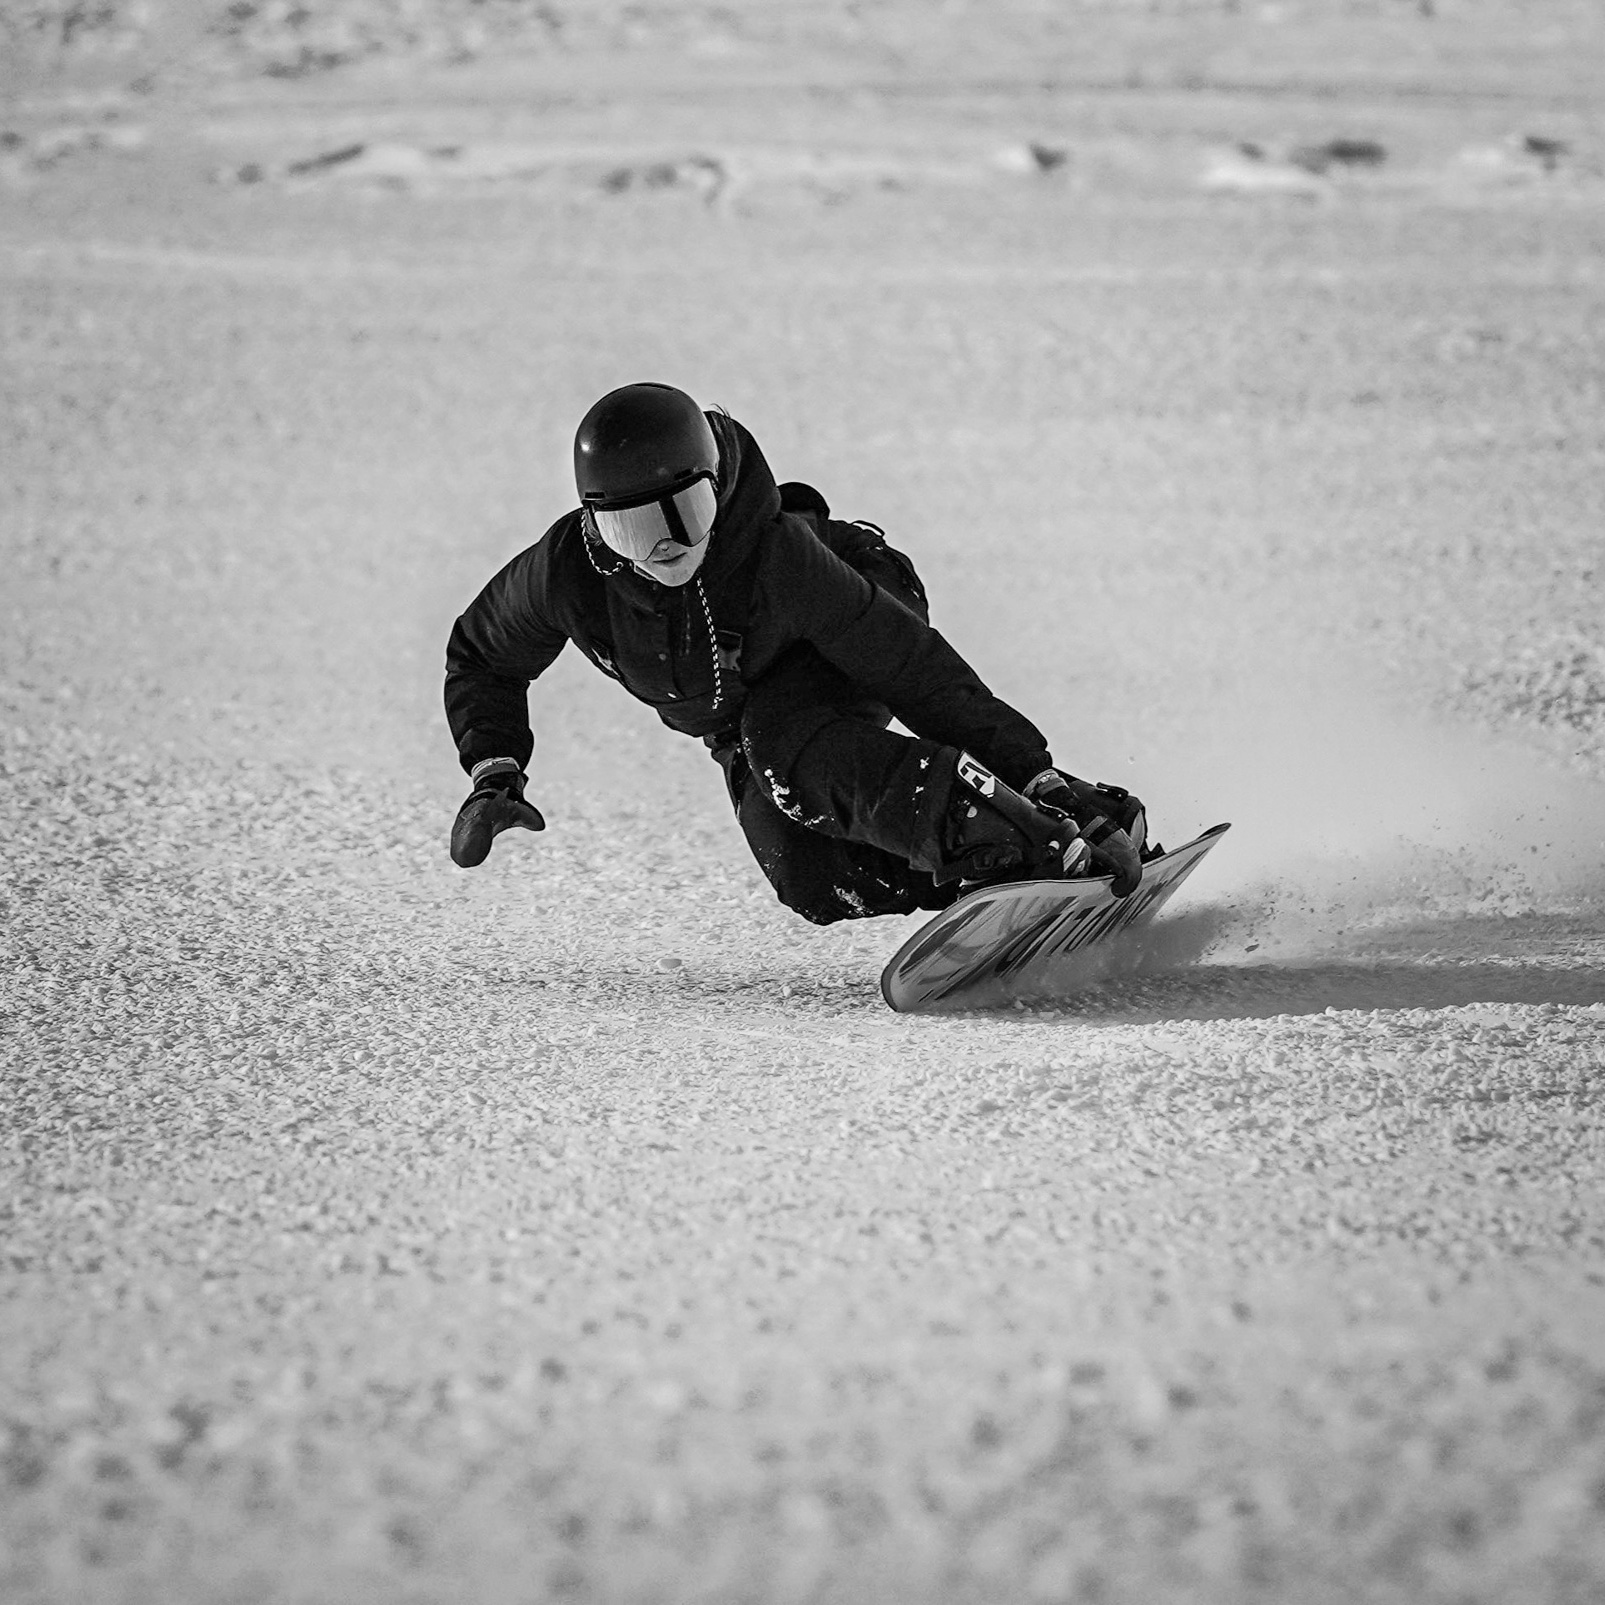  CARVING PISTE / GROOMER - I want to lay out flat and feel the centrifugal force on fresh corduroy.